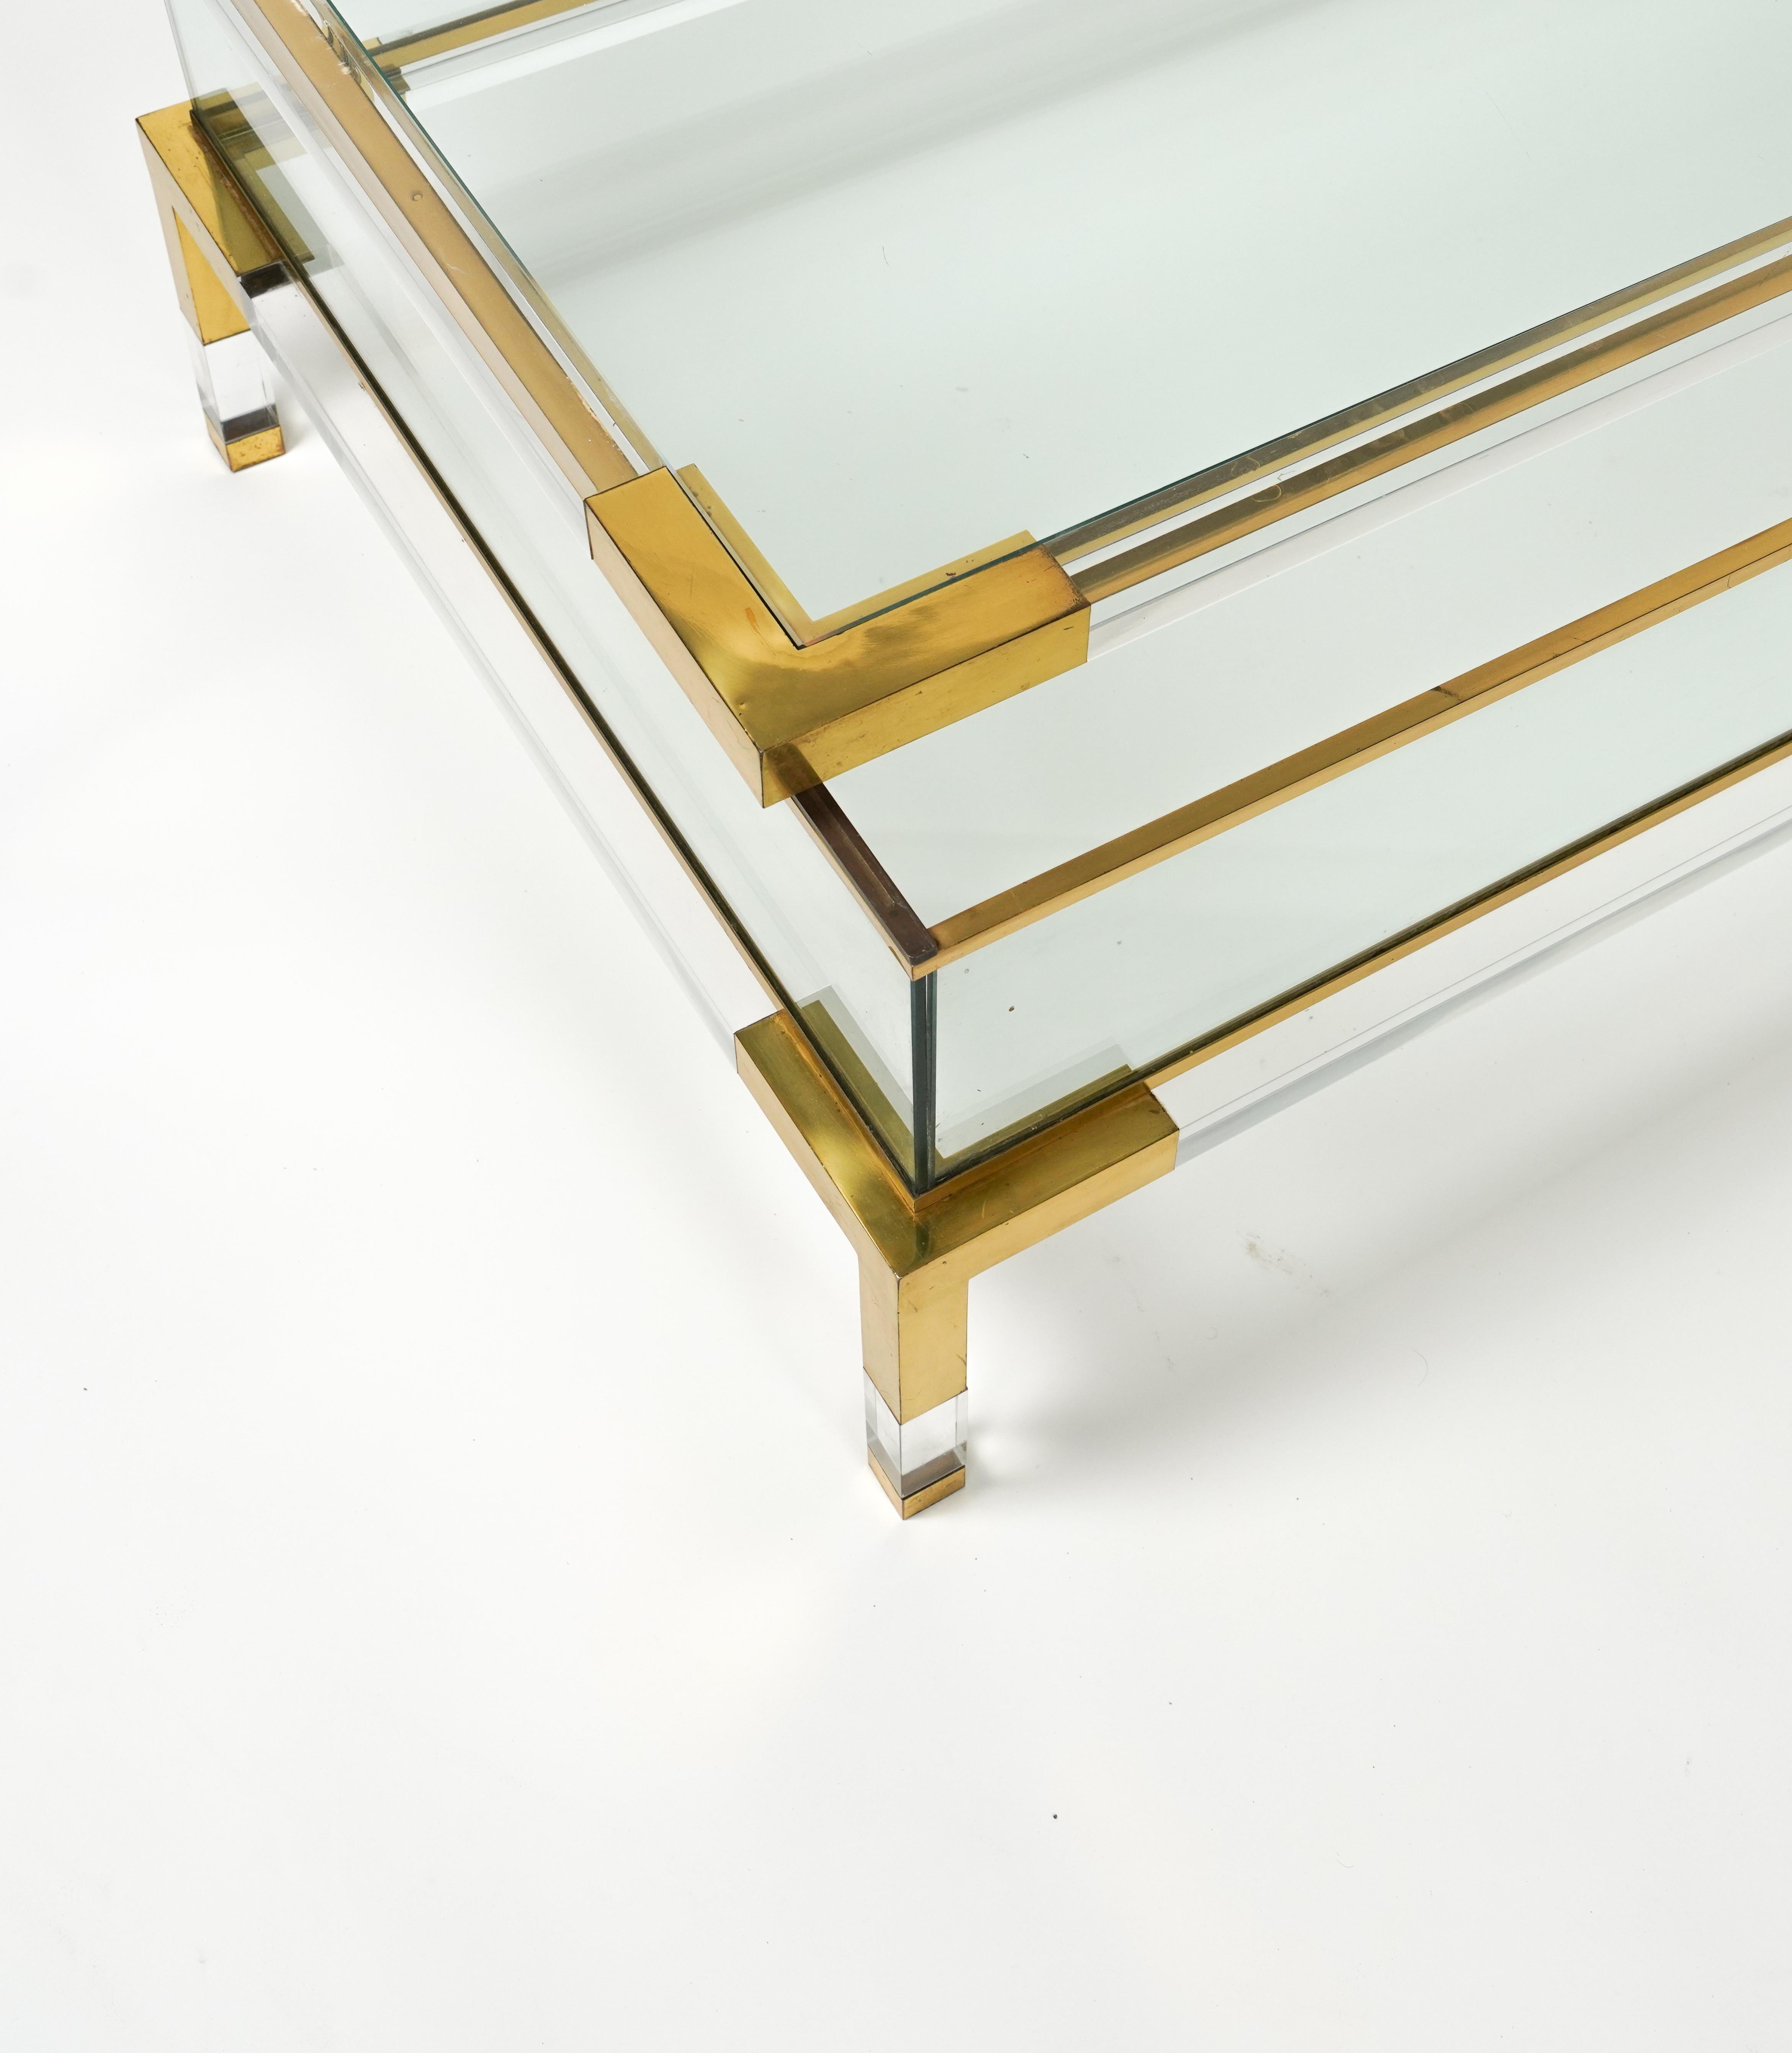 Midcentury Coffee Table in Lucite, Brass & Glass by Maison Jansen, France 1970s For Sale 9